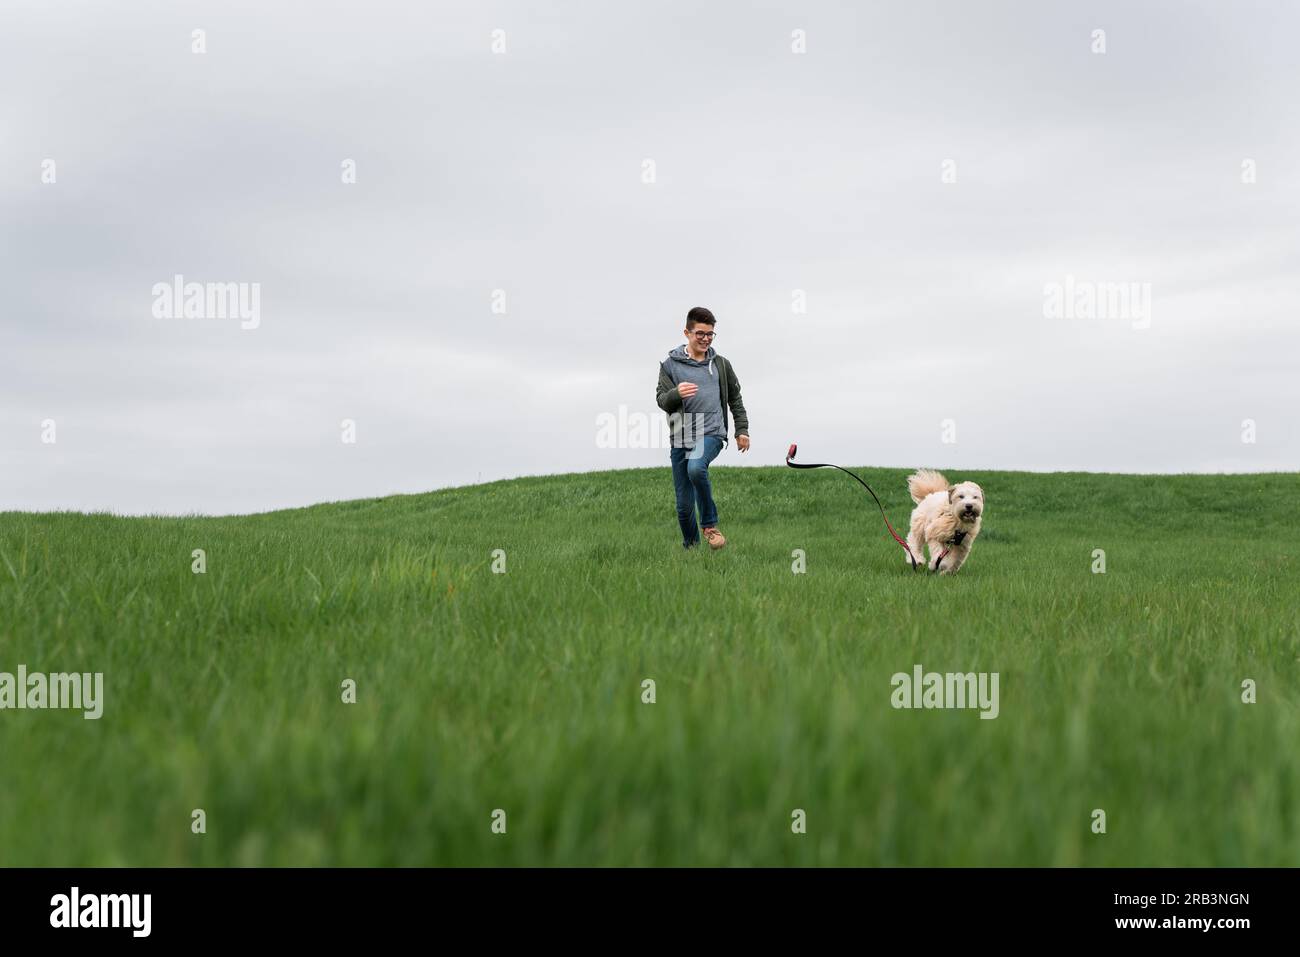 Teenage boy running across a grassy field with his dog on cloudy day. Stock Photo